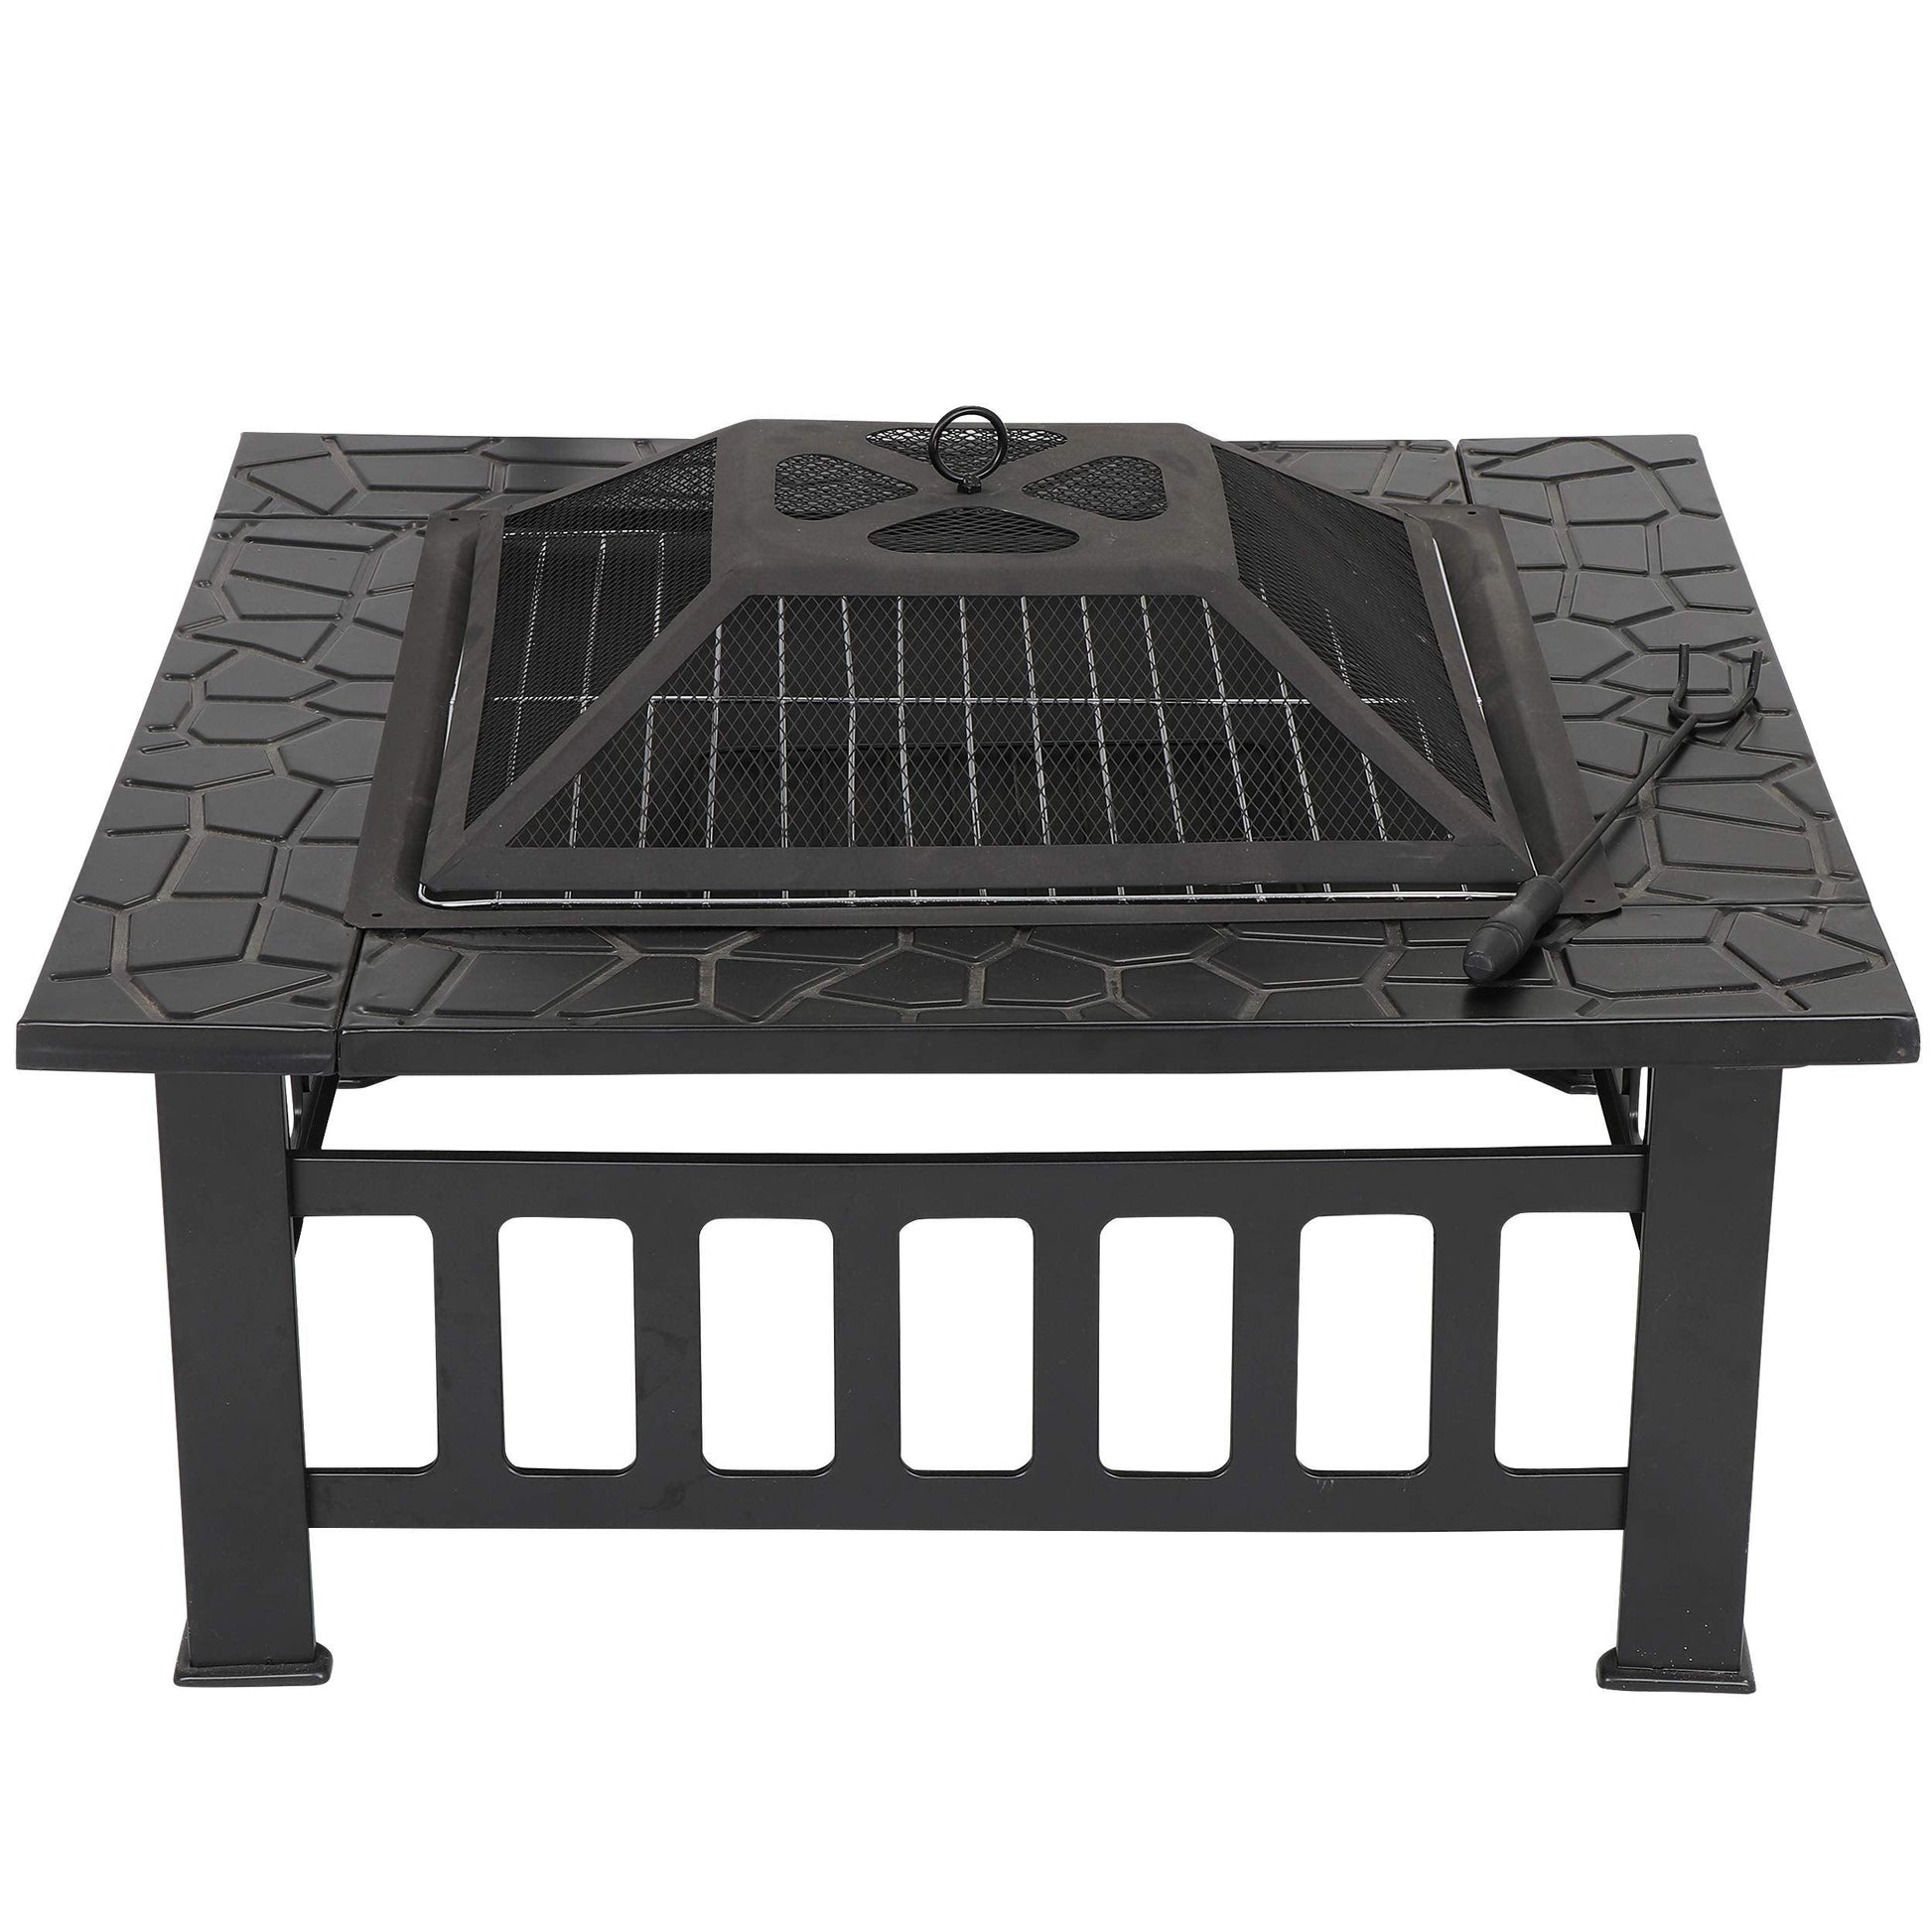 ZENY 32" Outdoor Fire Pit Square Table Metal Firepit Table Backyard Patio Garden Stove Wood Burning Fireplace w/ Waterproof Cover, Spark Screen and Poker - CookCave